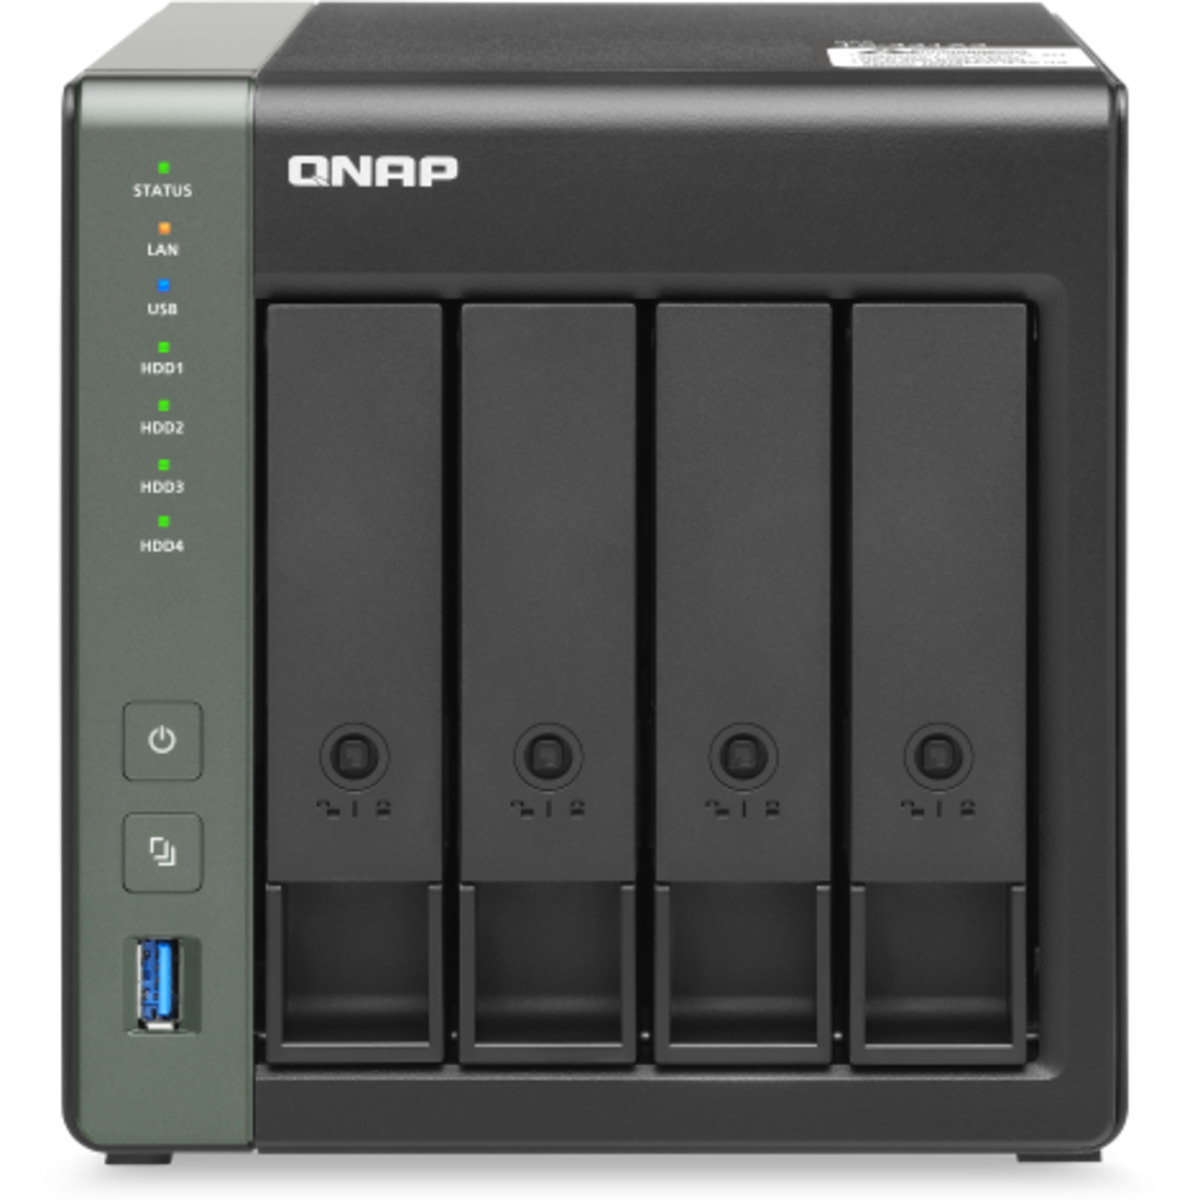 QNAP TS-431X3 16tb 4-Bay Desktop Multimedia / Power User / Business NAS - Network Attached Storage Device 4x4tb Samsung 870 EVO MZ-77E4T0BAM 2.5 560/530MB/s SATA 6Gb/s SSD CONSUMER Class Drives Installed - Burn-In Tested - ON SALE - FREE RAM UPGRADE TS-431X3